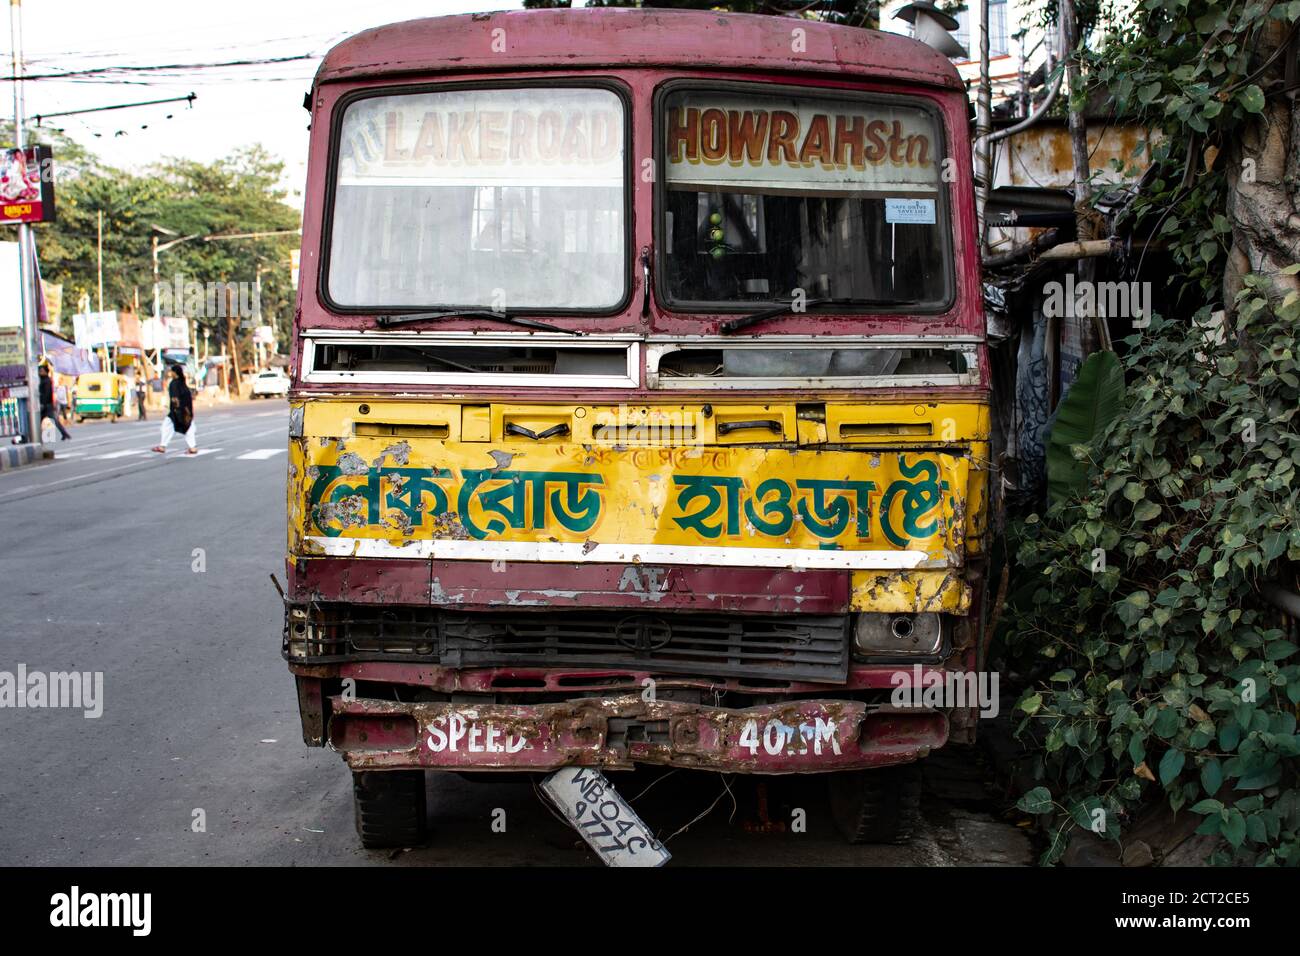 Kolkata, India - February 1, 2020: Front view of an old  local public transport bus in red, brown and yellow between Lakeroad and Howrah station Stock Photo